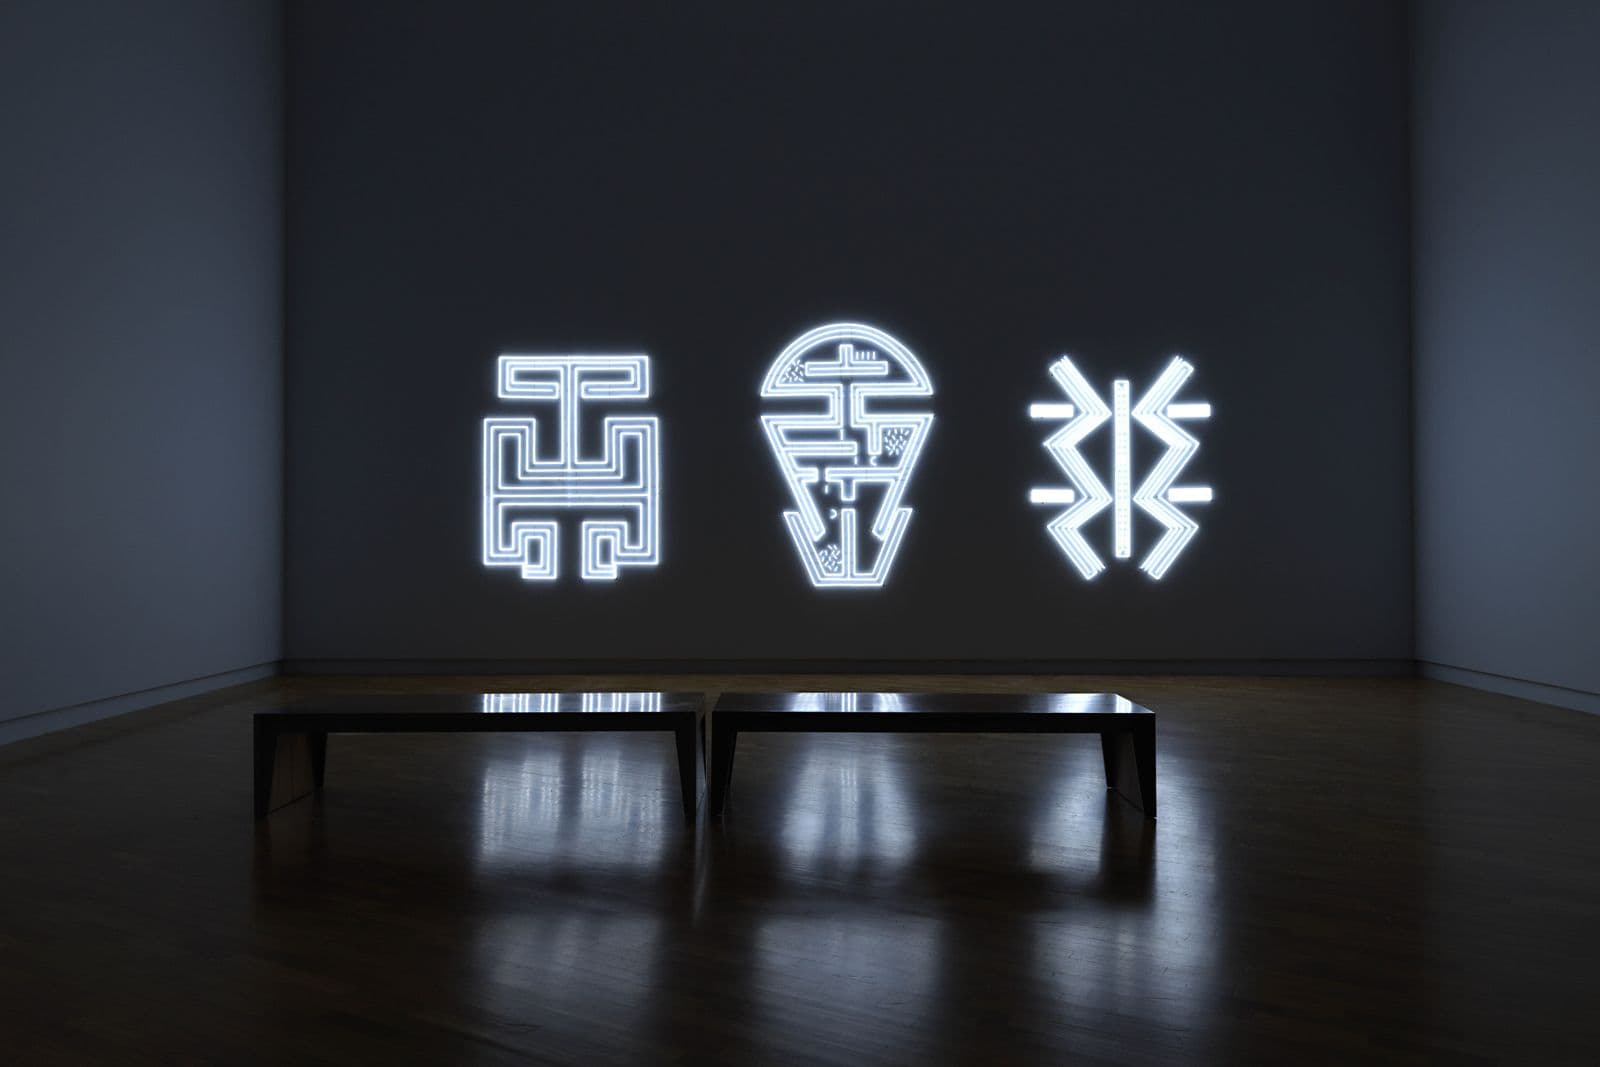 Three large linework neon light designs are hung across a wide wall